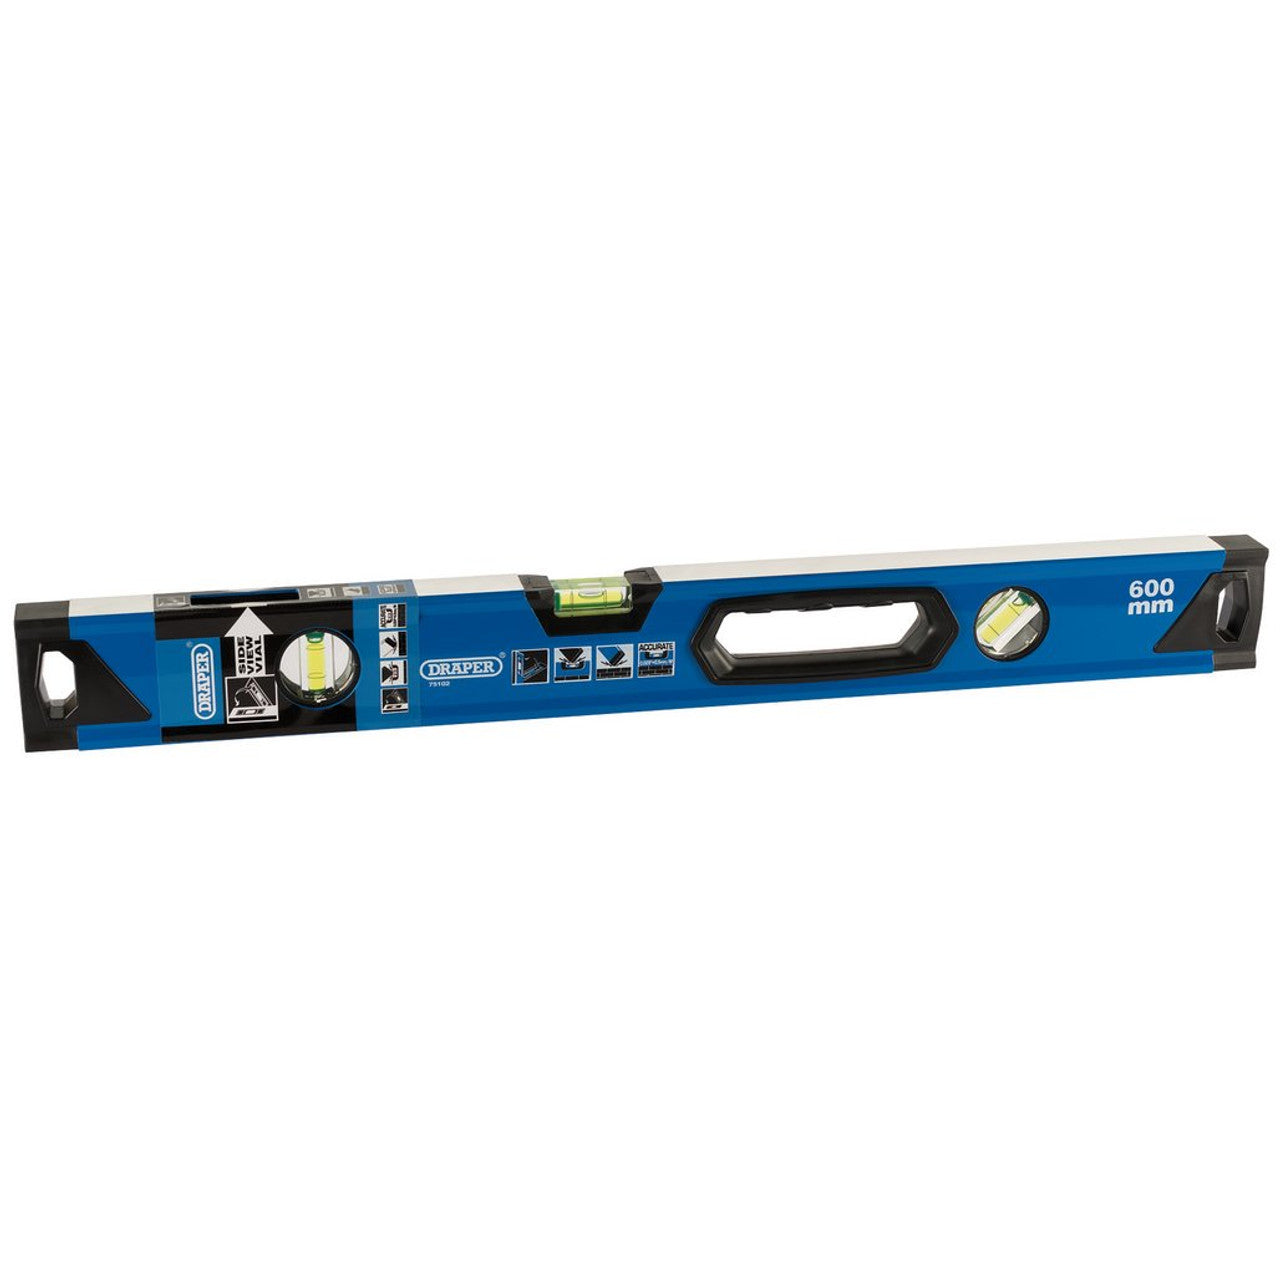 Draper 75102 Box Section Level with Side View Vial, 600mm